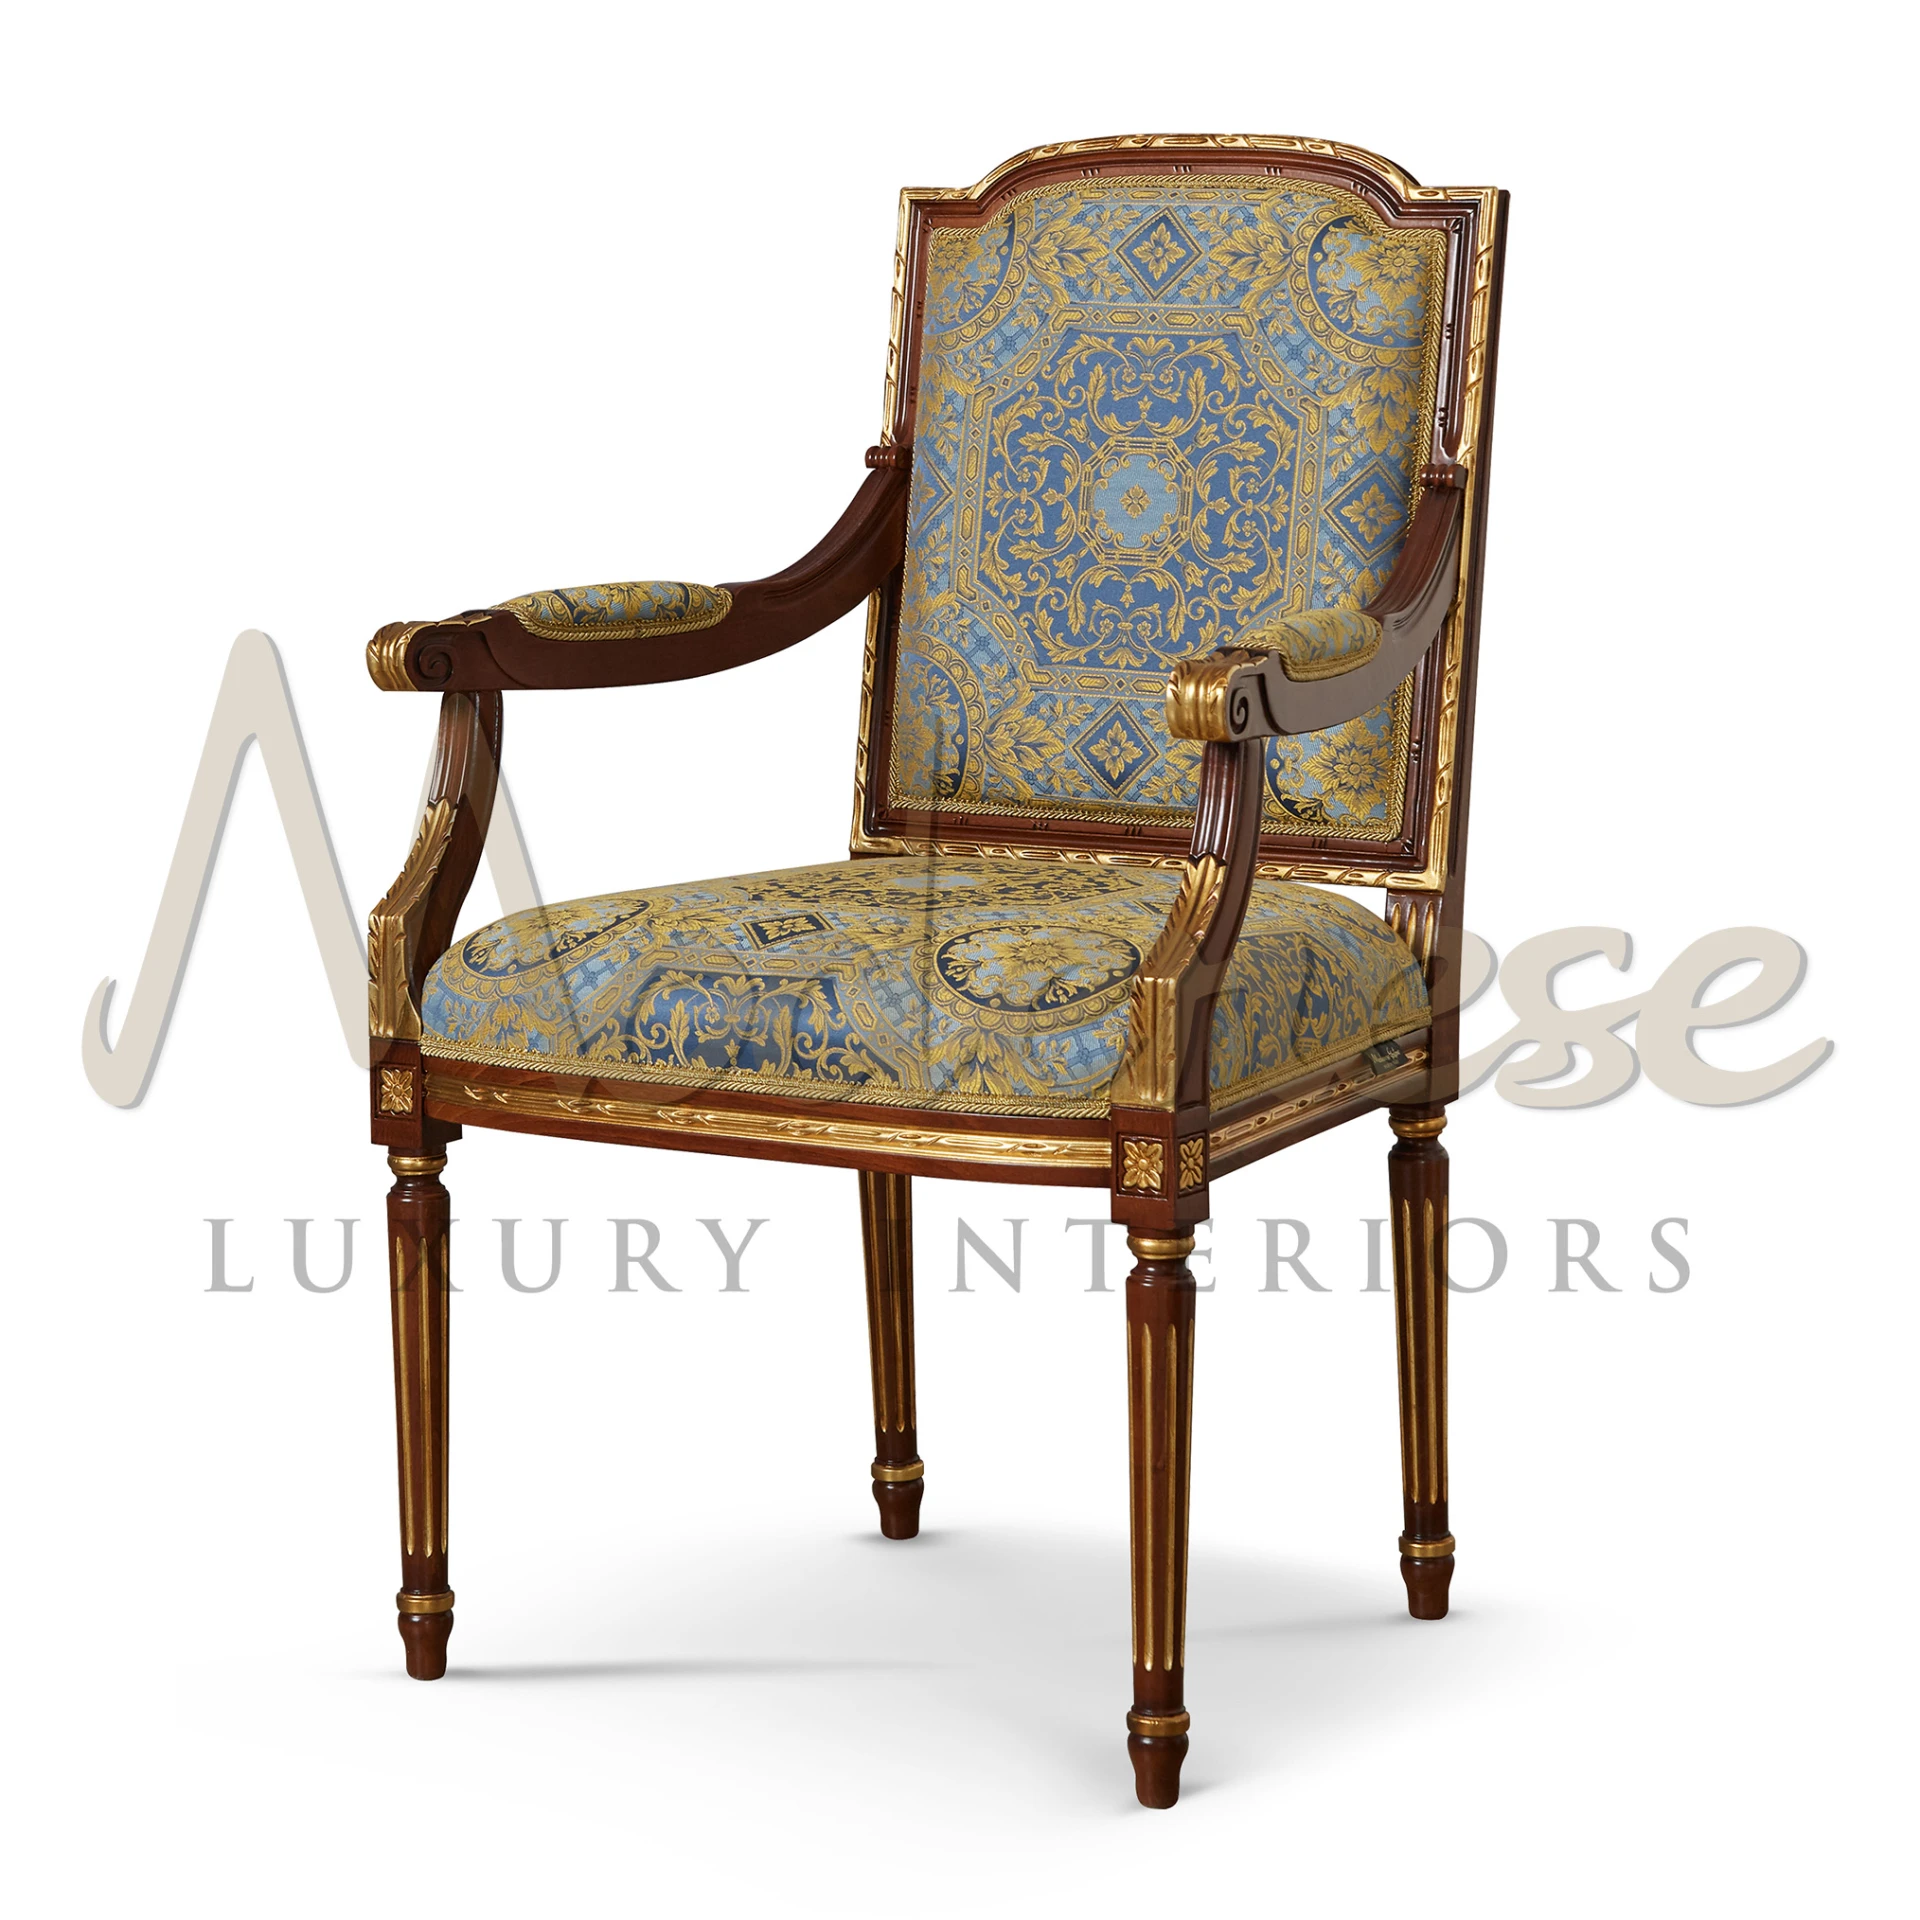 Handmade baroque chair with armrest, walnut wood and gold leaf finish.